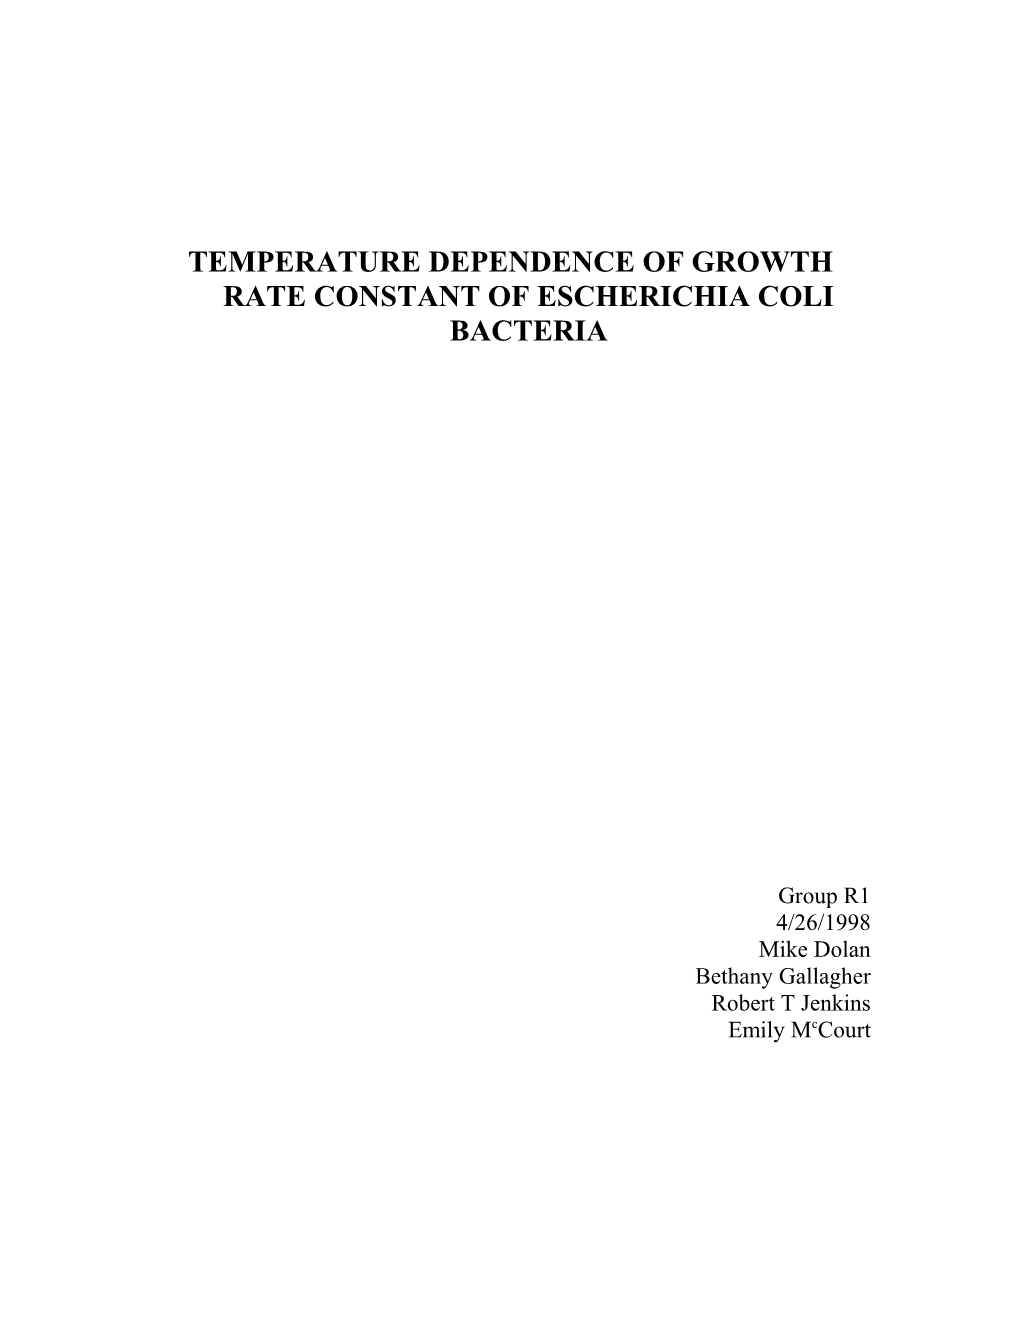 Temperature Dependence of Growth Rate Constant of Escherichia Coli Bacteria